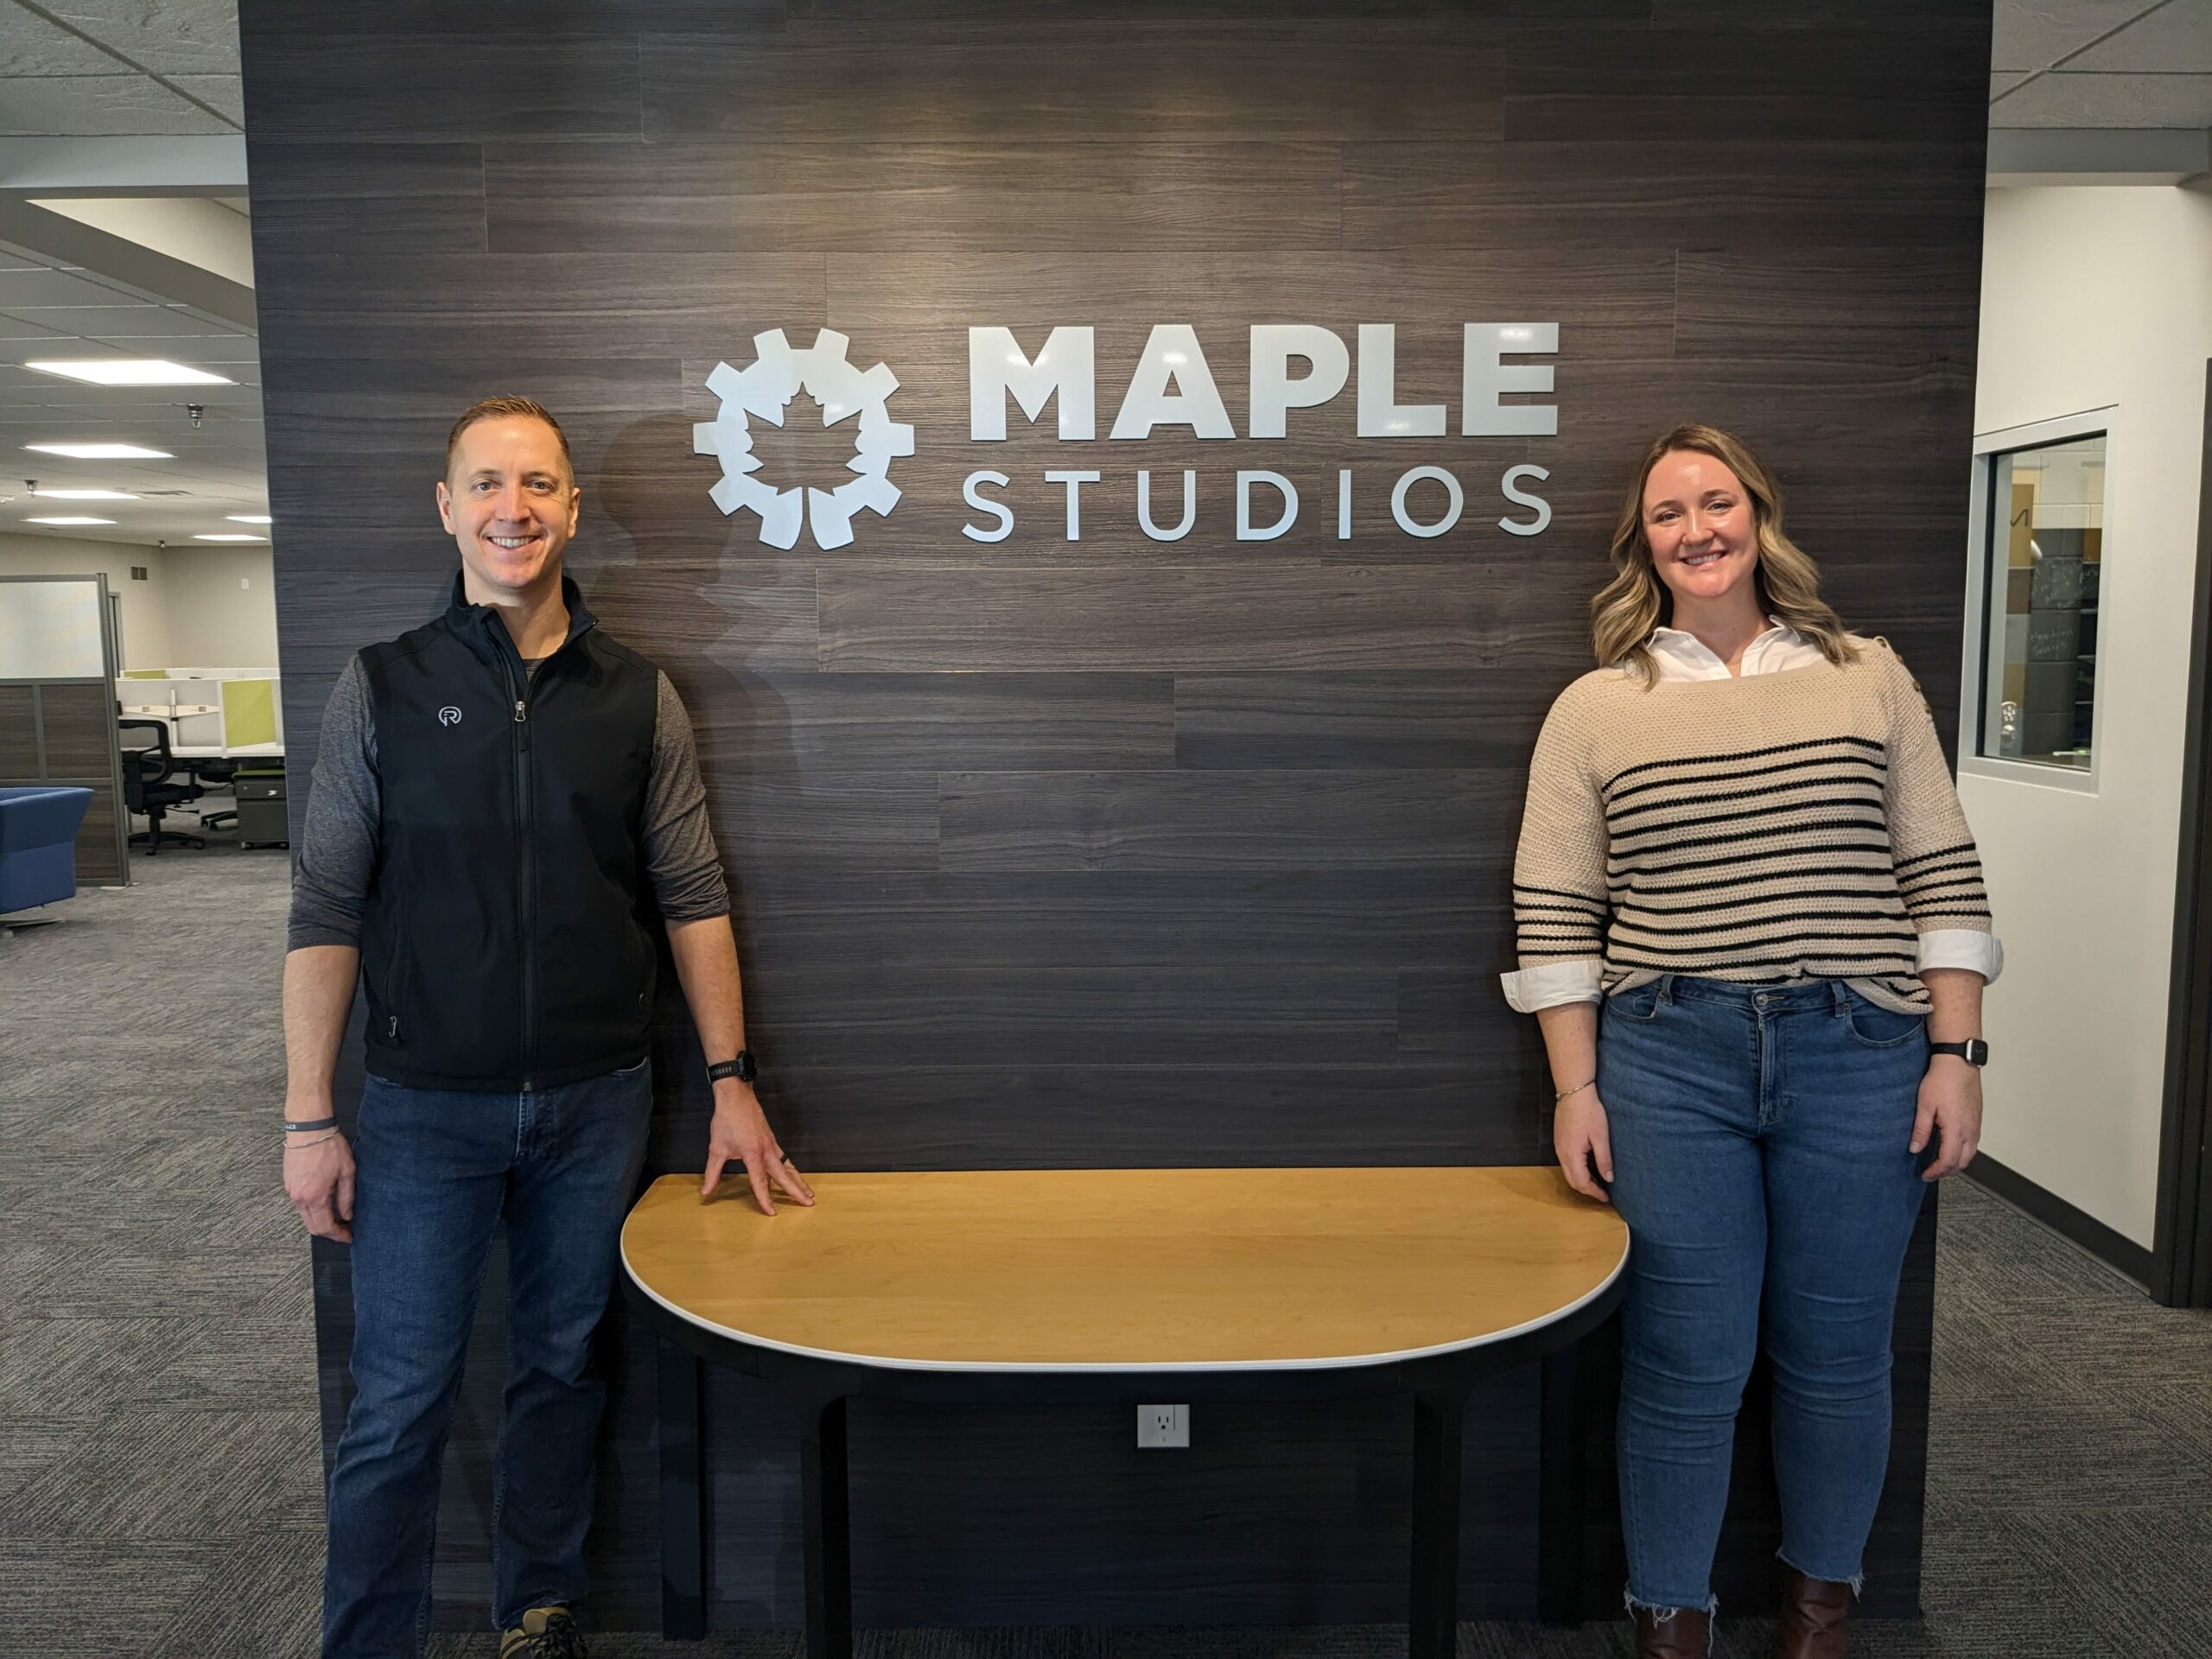 Maple Studios completes renovation, opens to new members